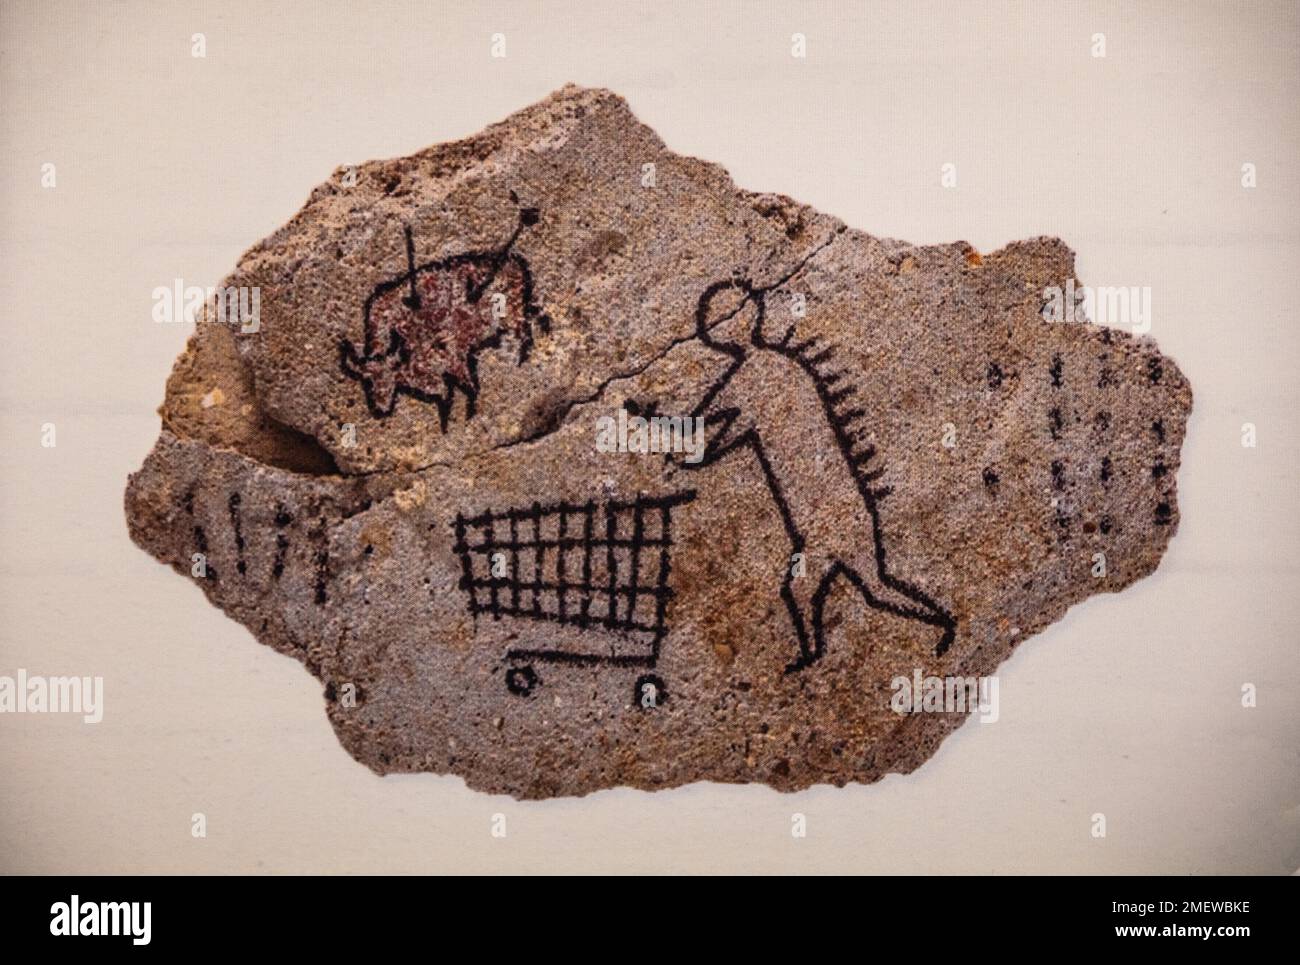 Banksys version of a primitive cave painting on the prowl with a shopping trolley, 2005, exhibition on the street artist, Muelheim, Germany Stock Photo